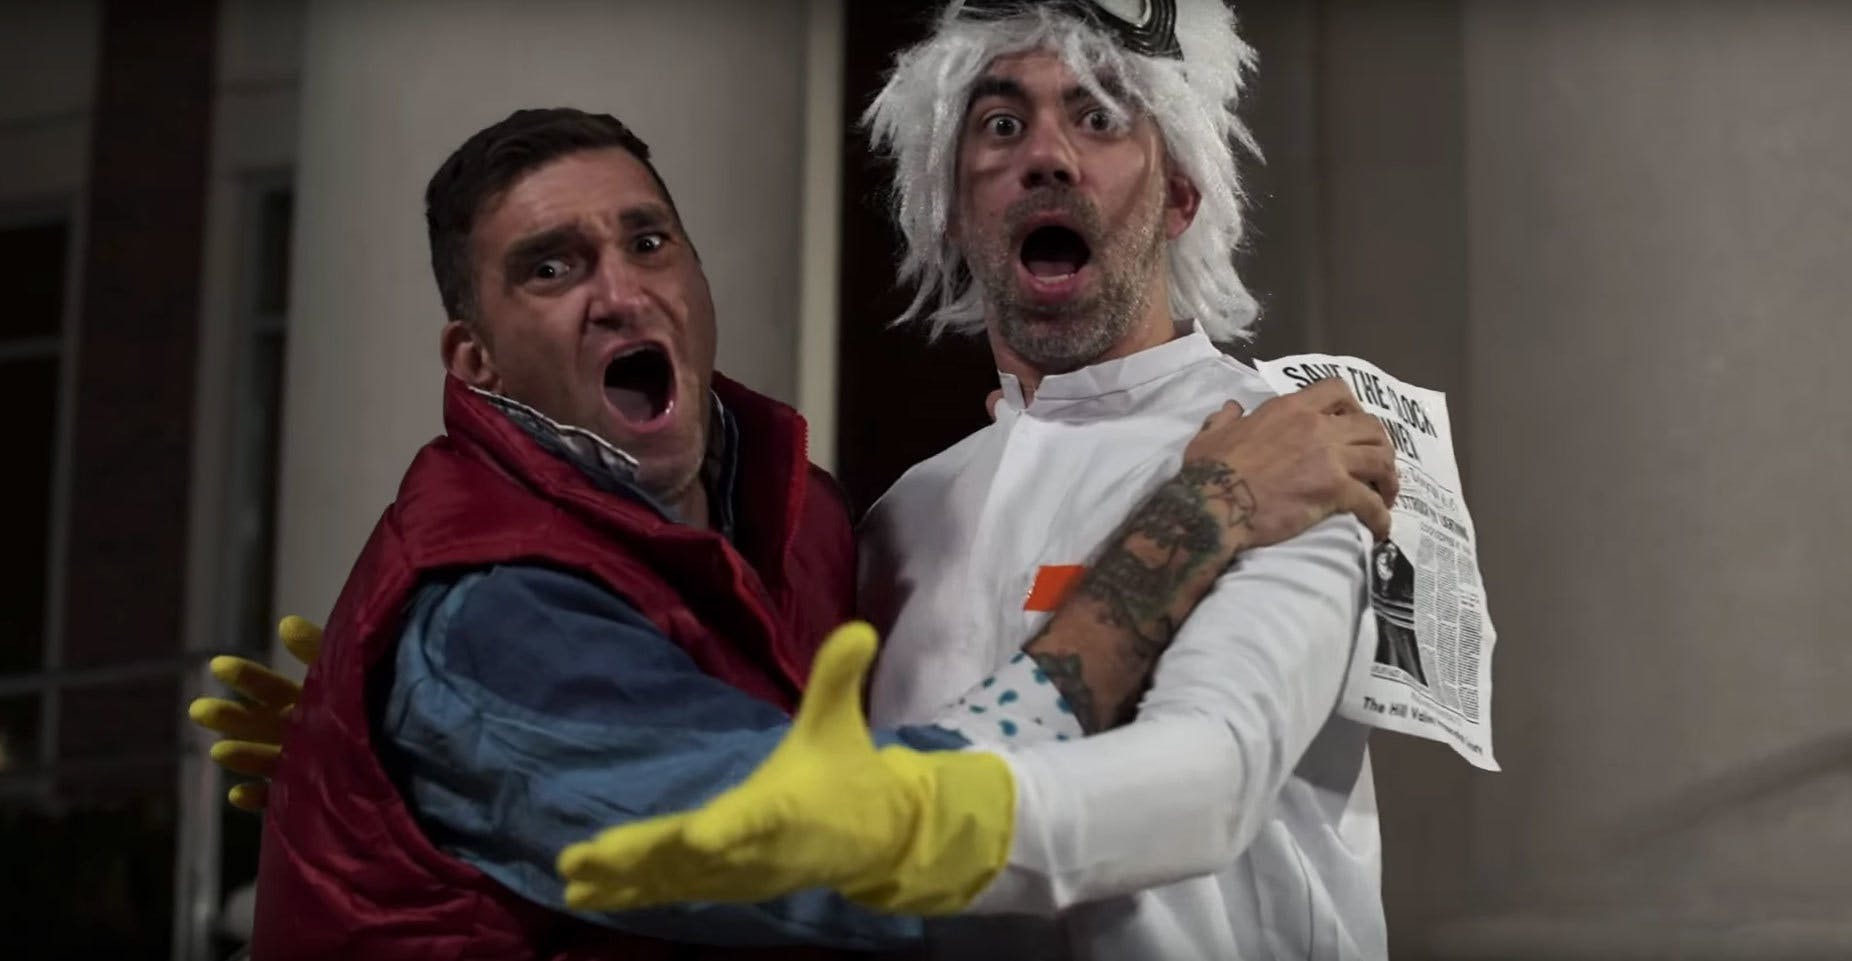 Watch New Found Glory Cover The Power Of Love From Back To The Future